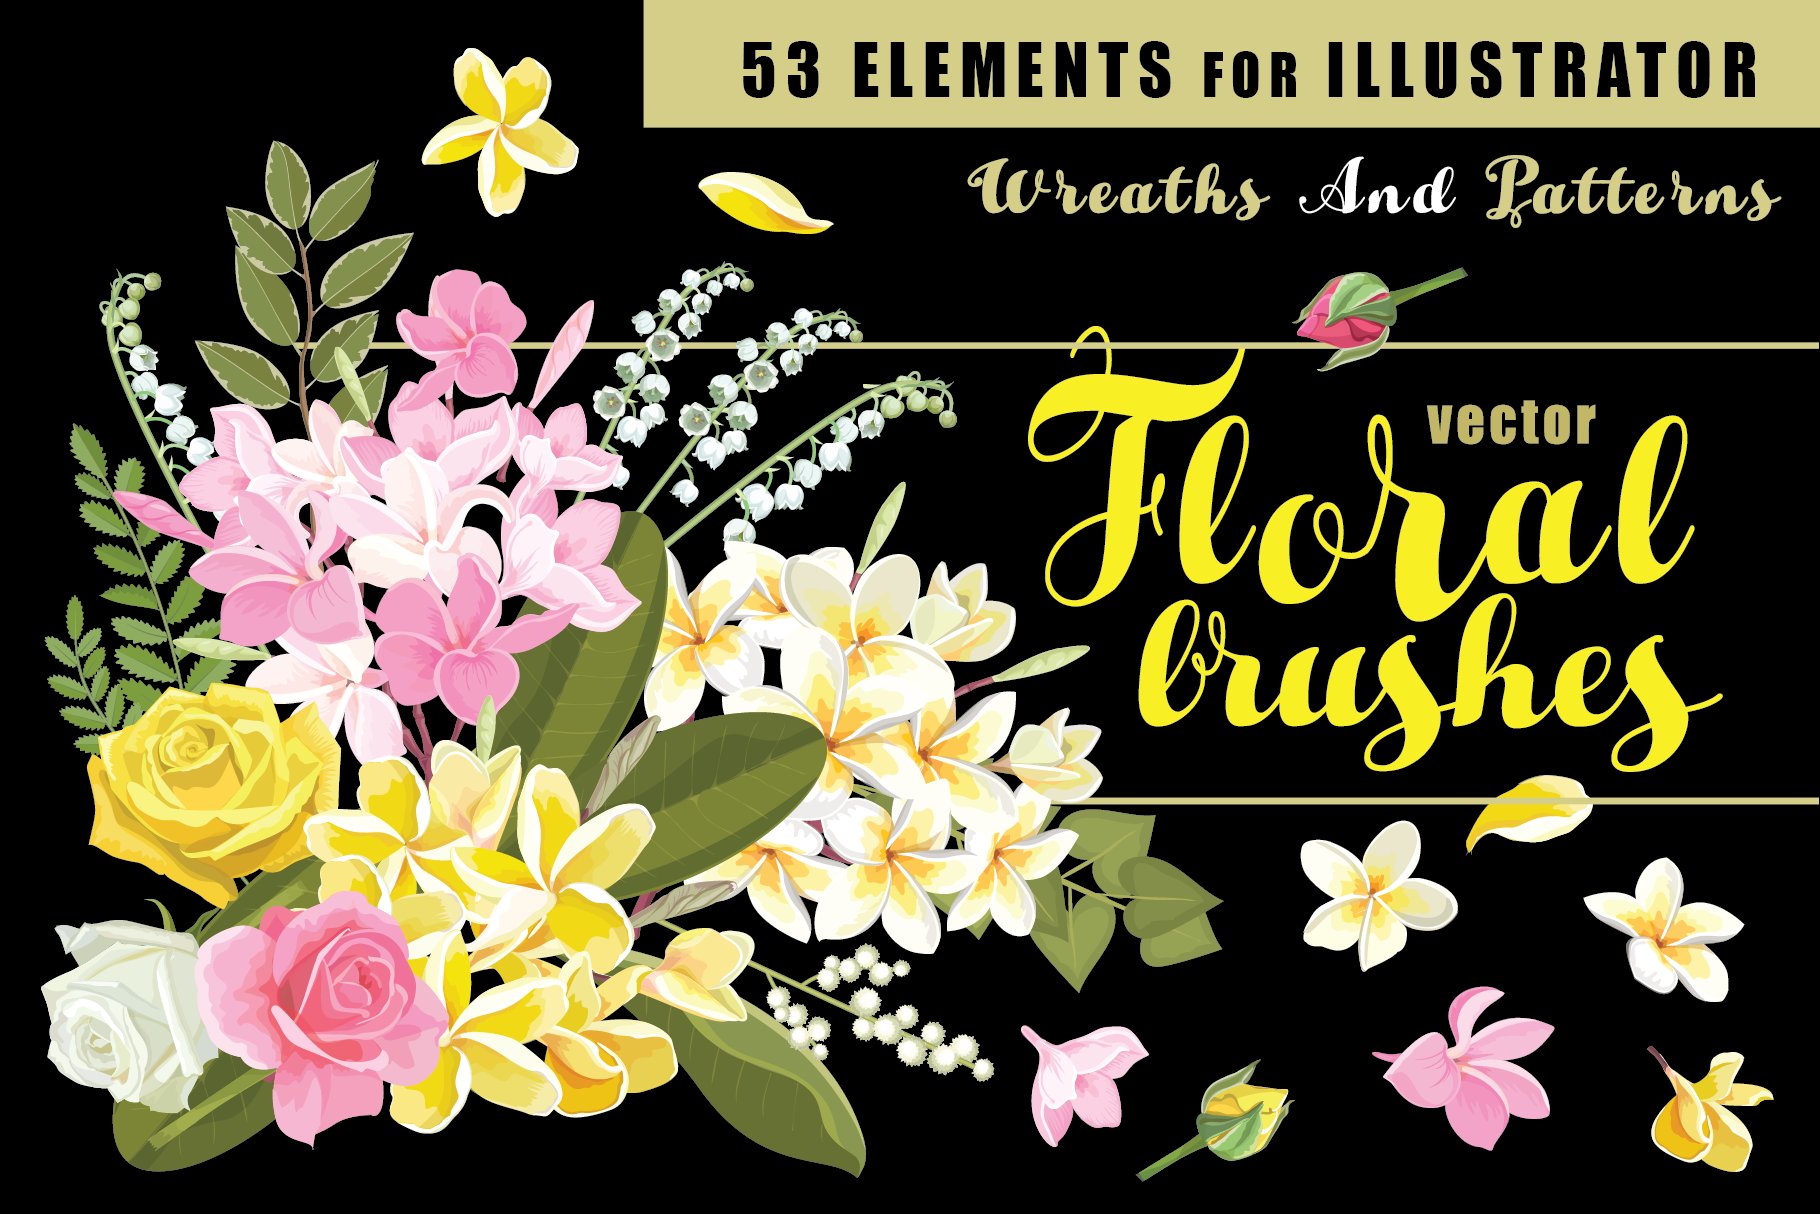 53 Floral brushes for Illustratorcover image.